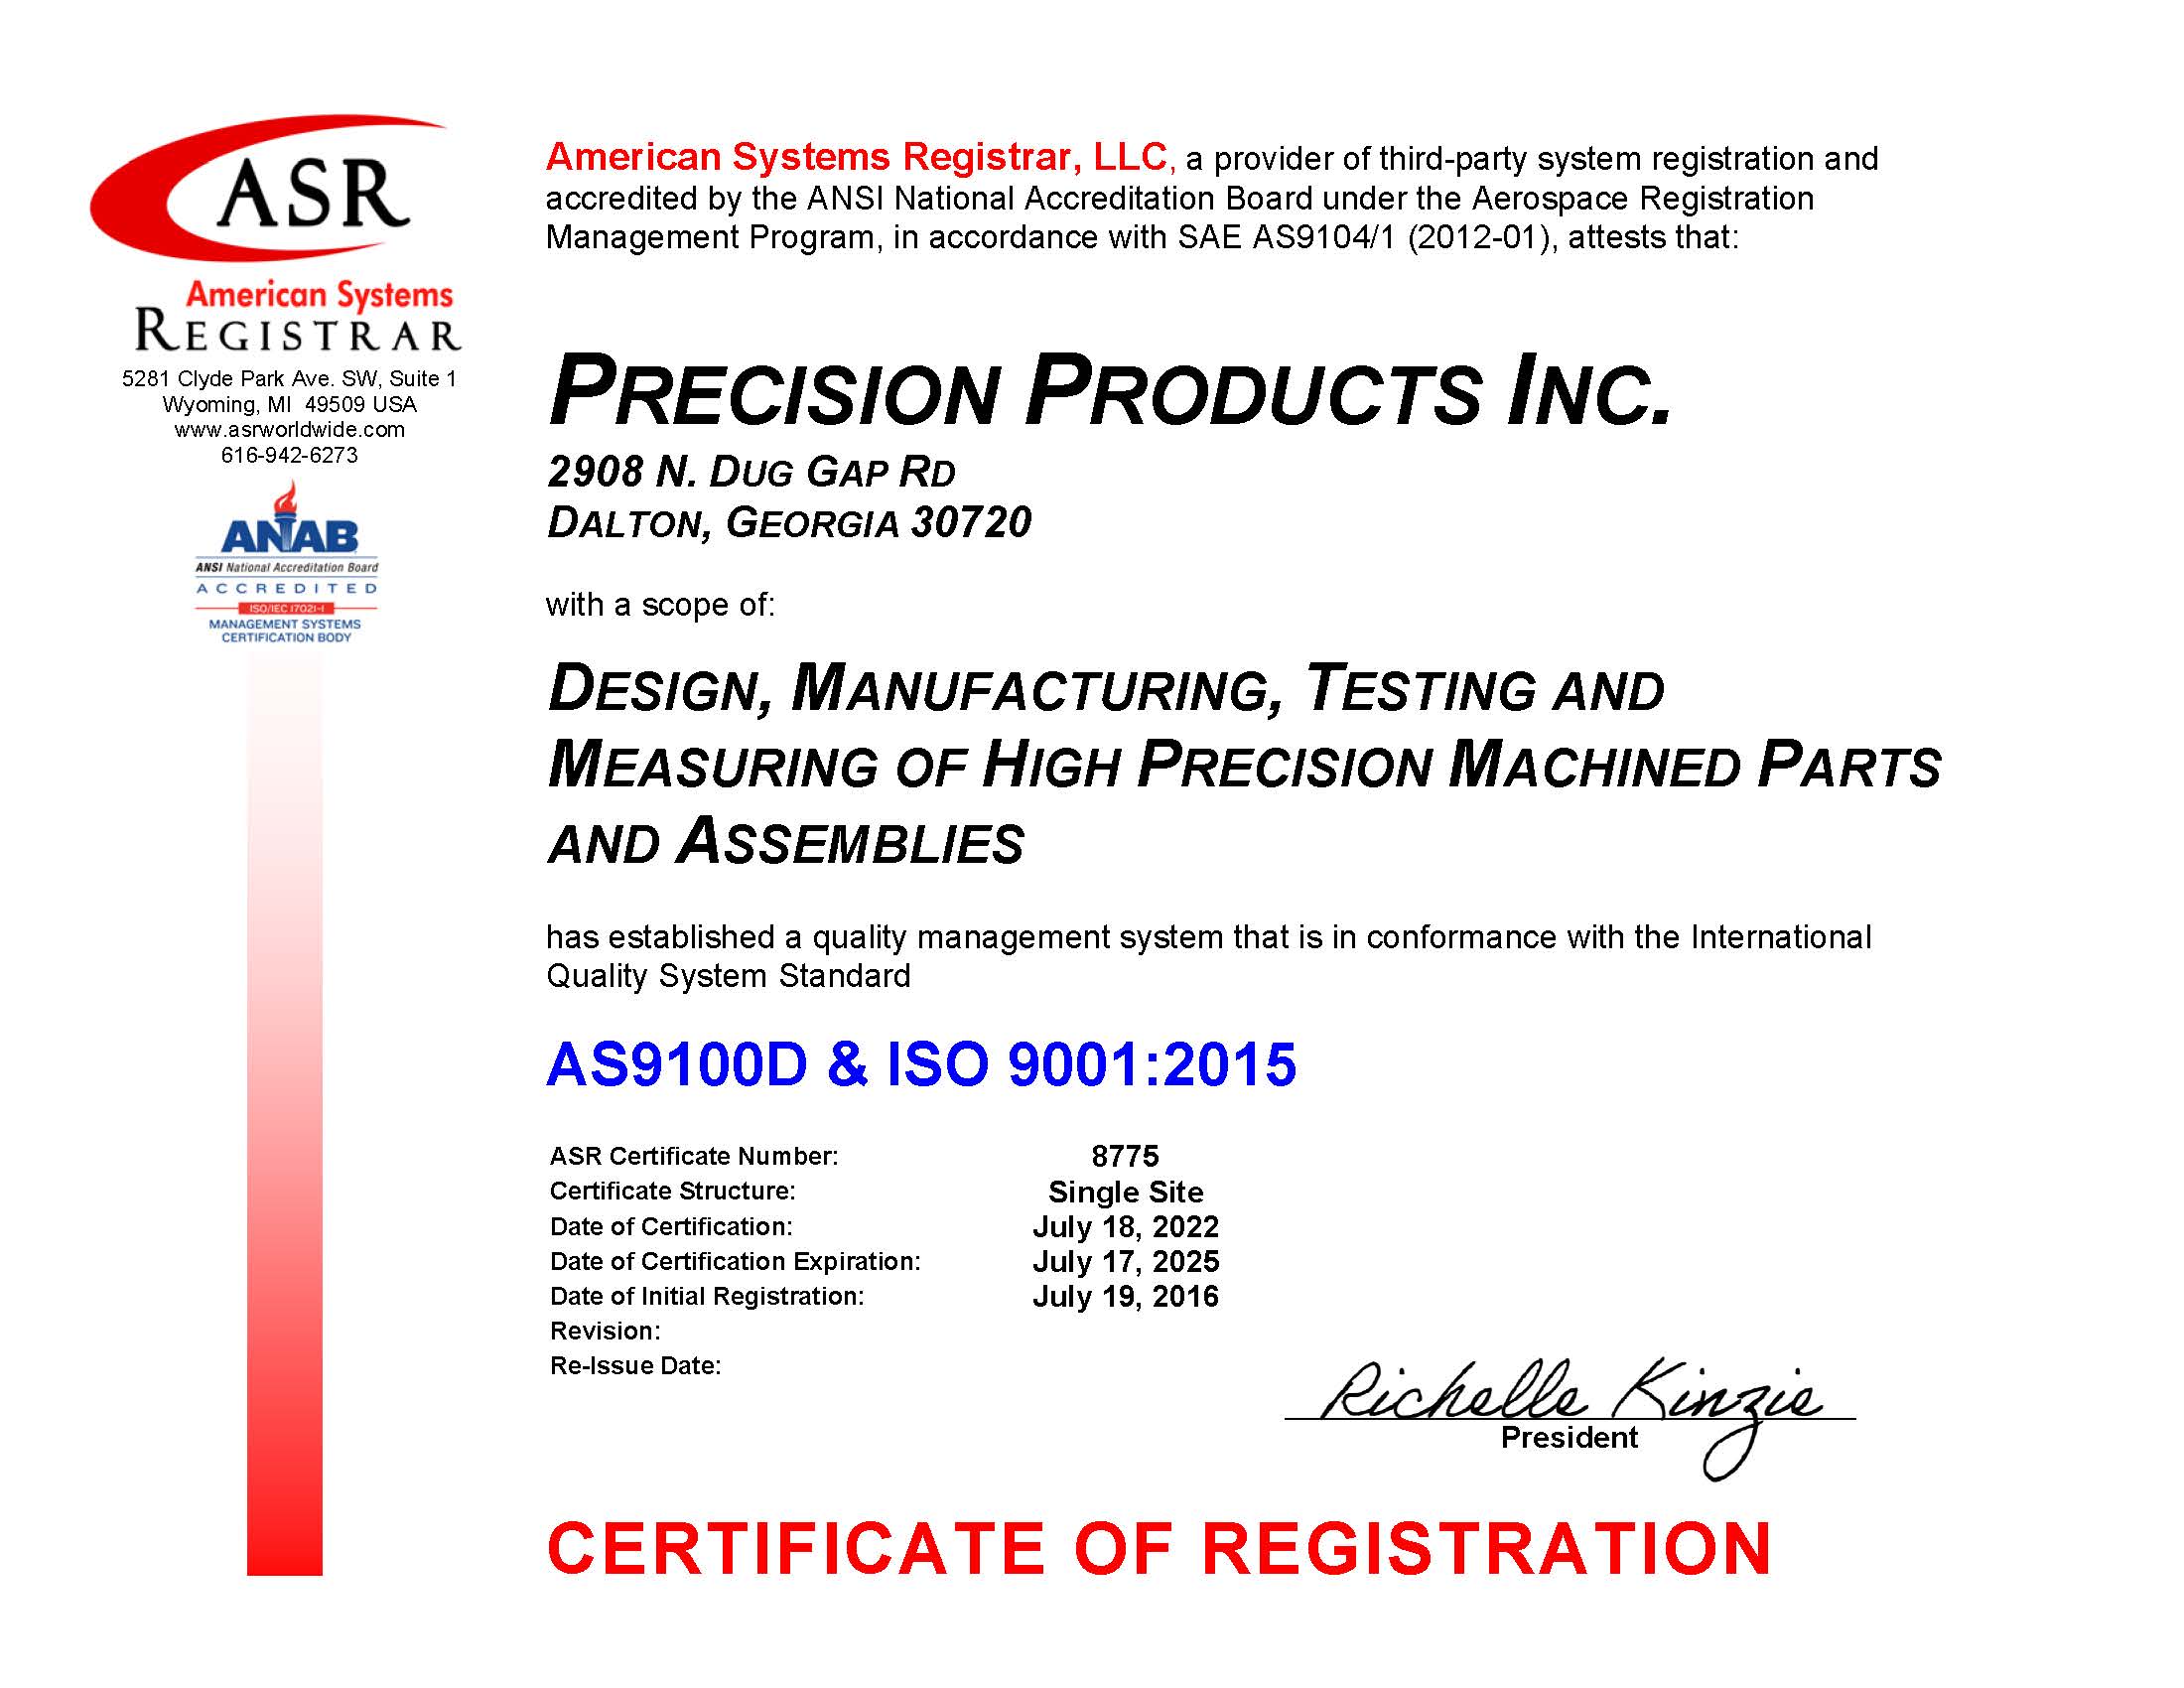 8775 Precision Products Inc AS9100 Certificate July 2022signed